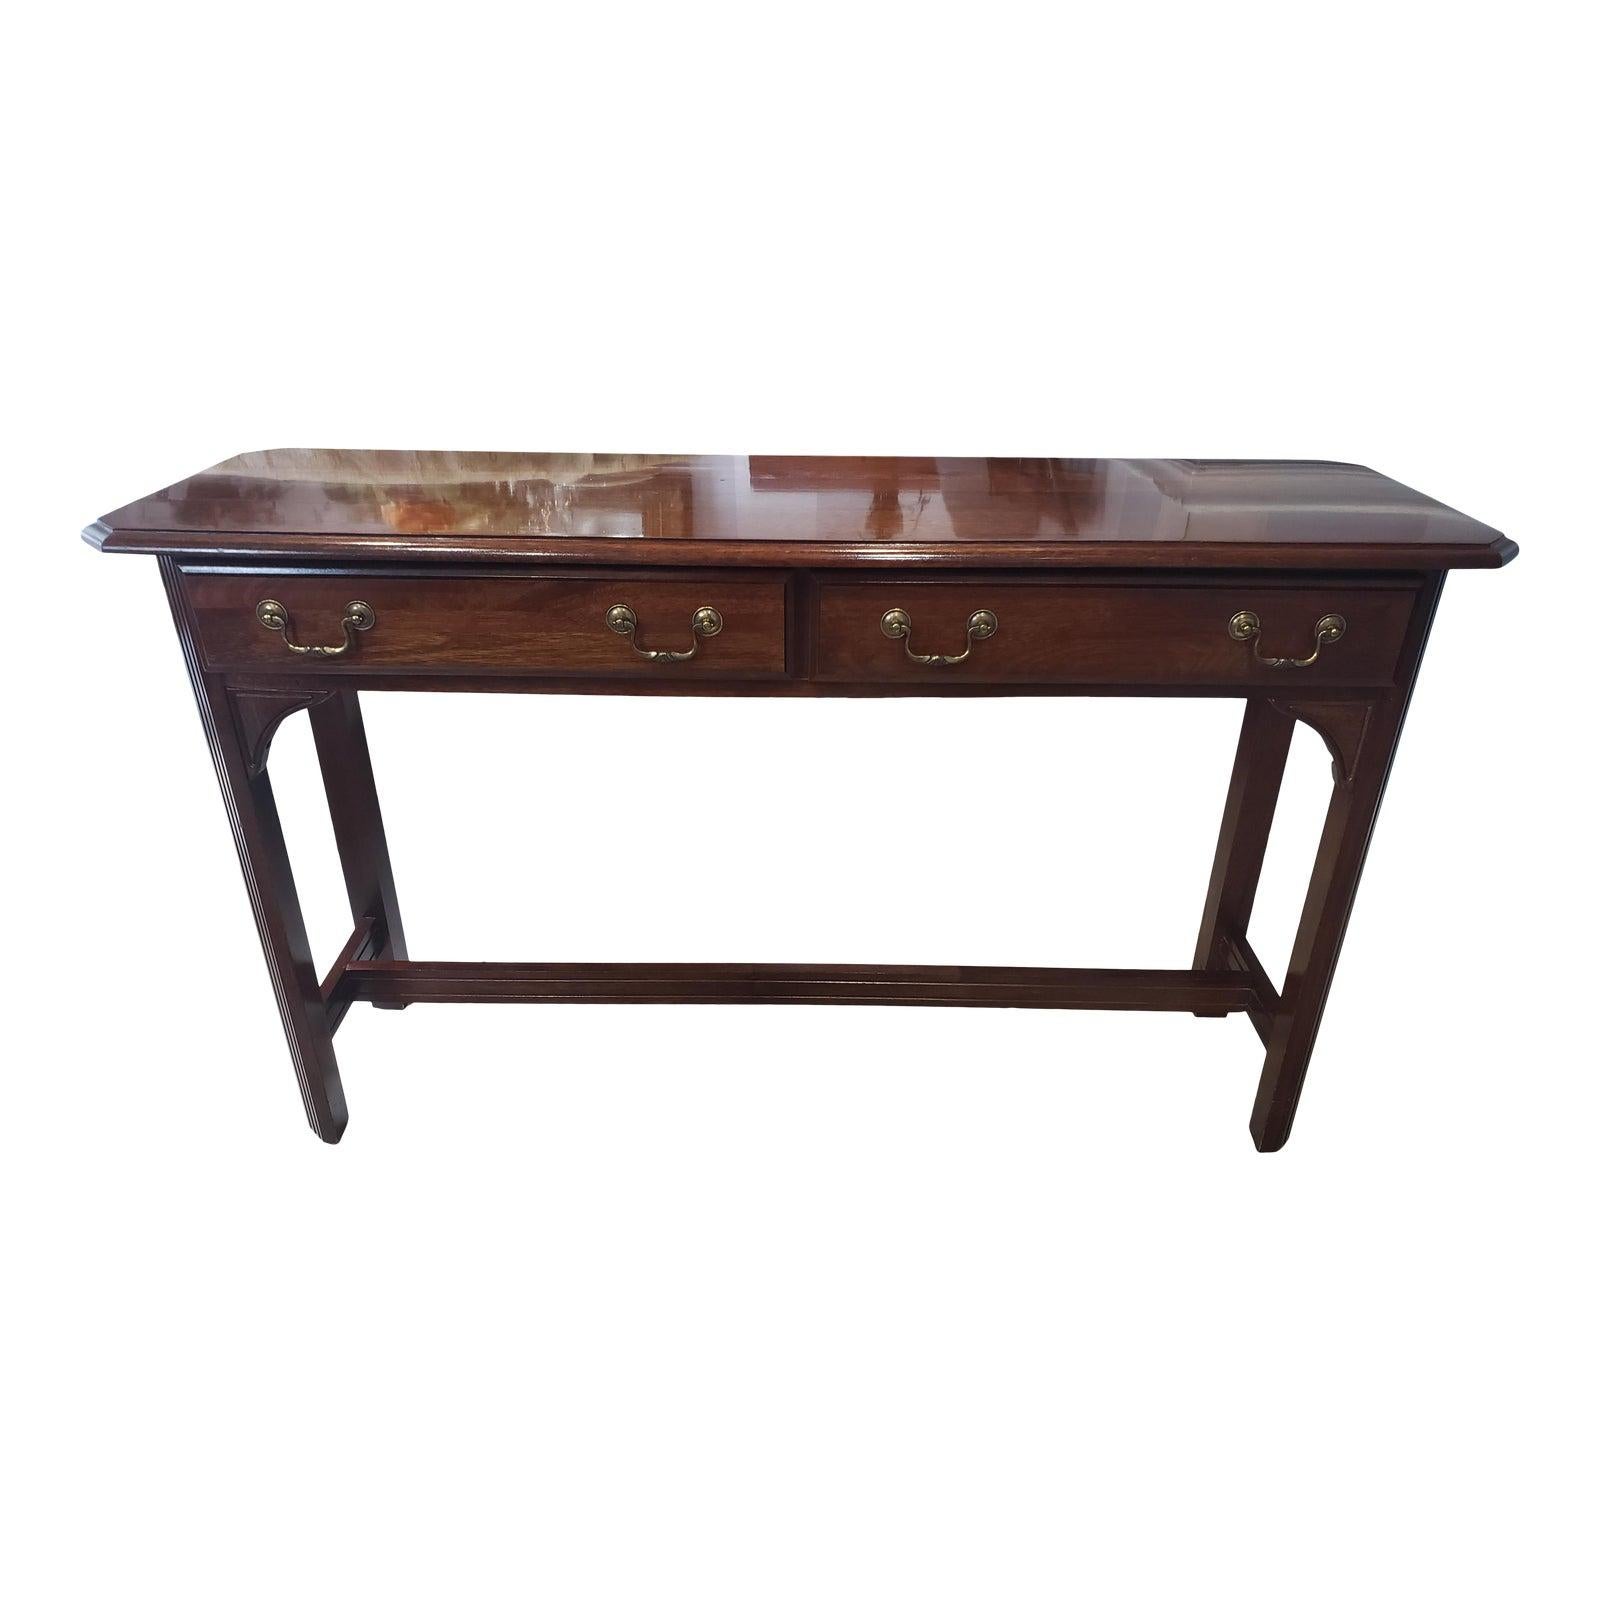 1970s Kincaid English Chippendale Solid Mahogany Console Table For Sale